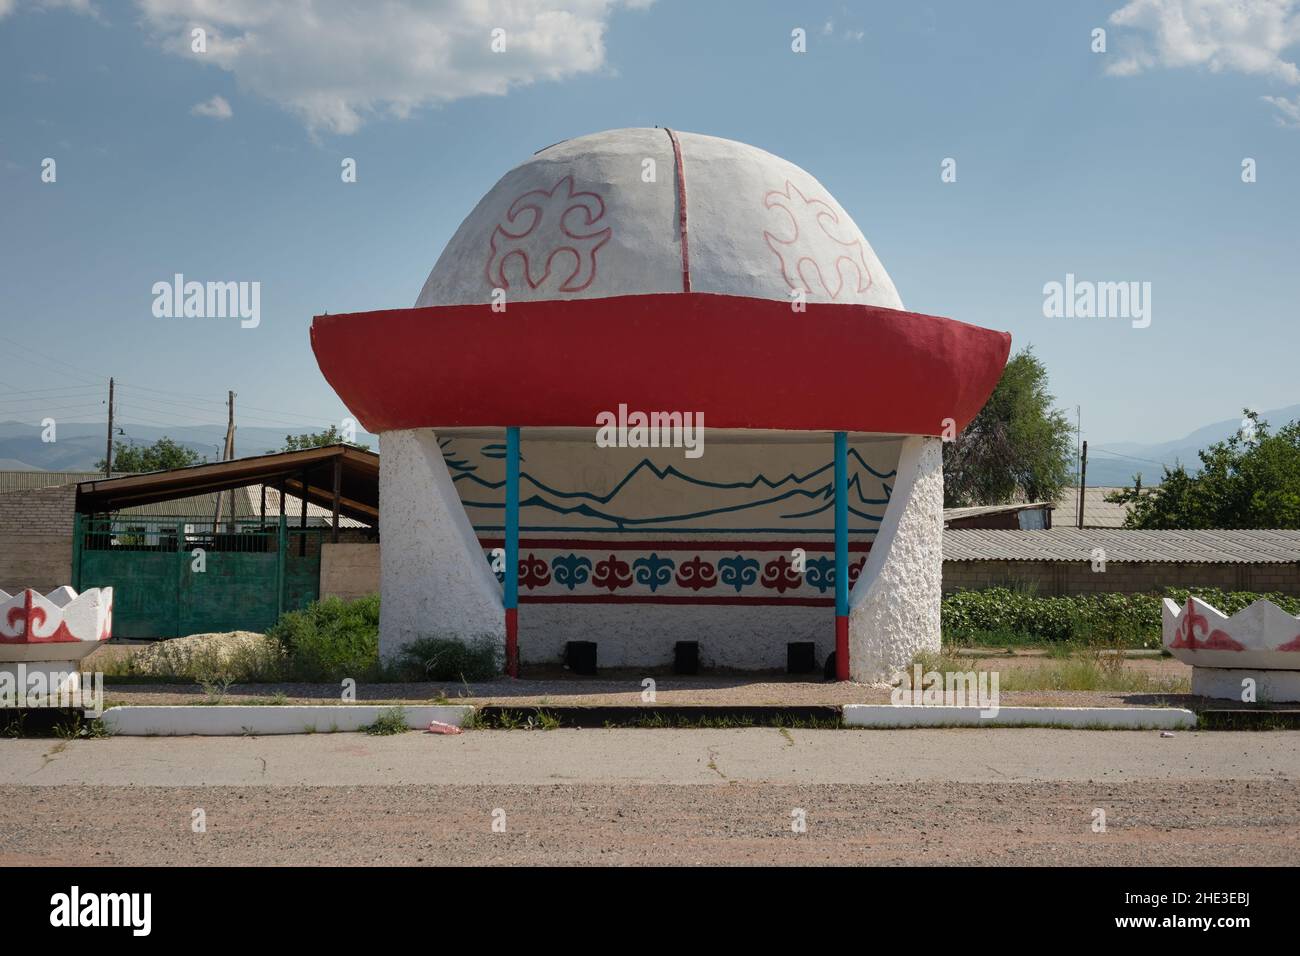 Kyrgyz bus stop in the shape of traditional central asian kalpak hat, Kyrgyzstan Stock Photo